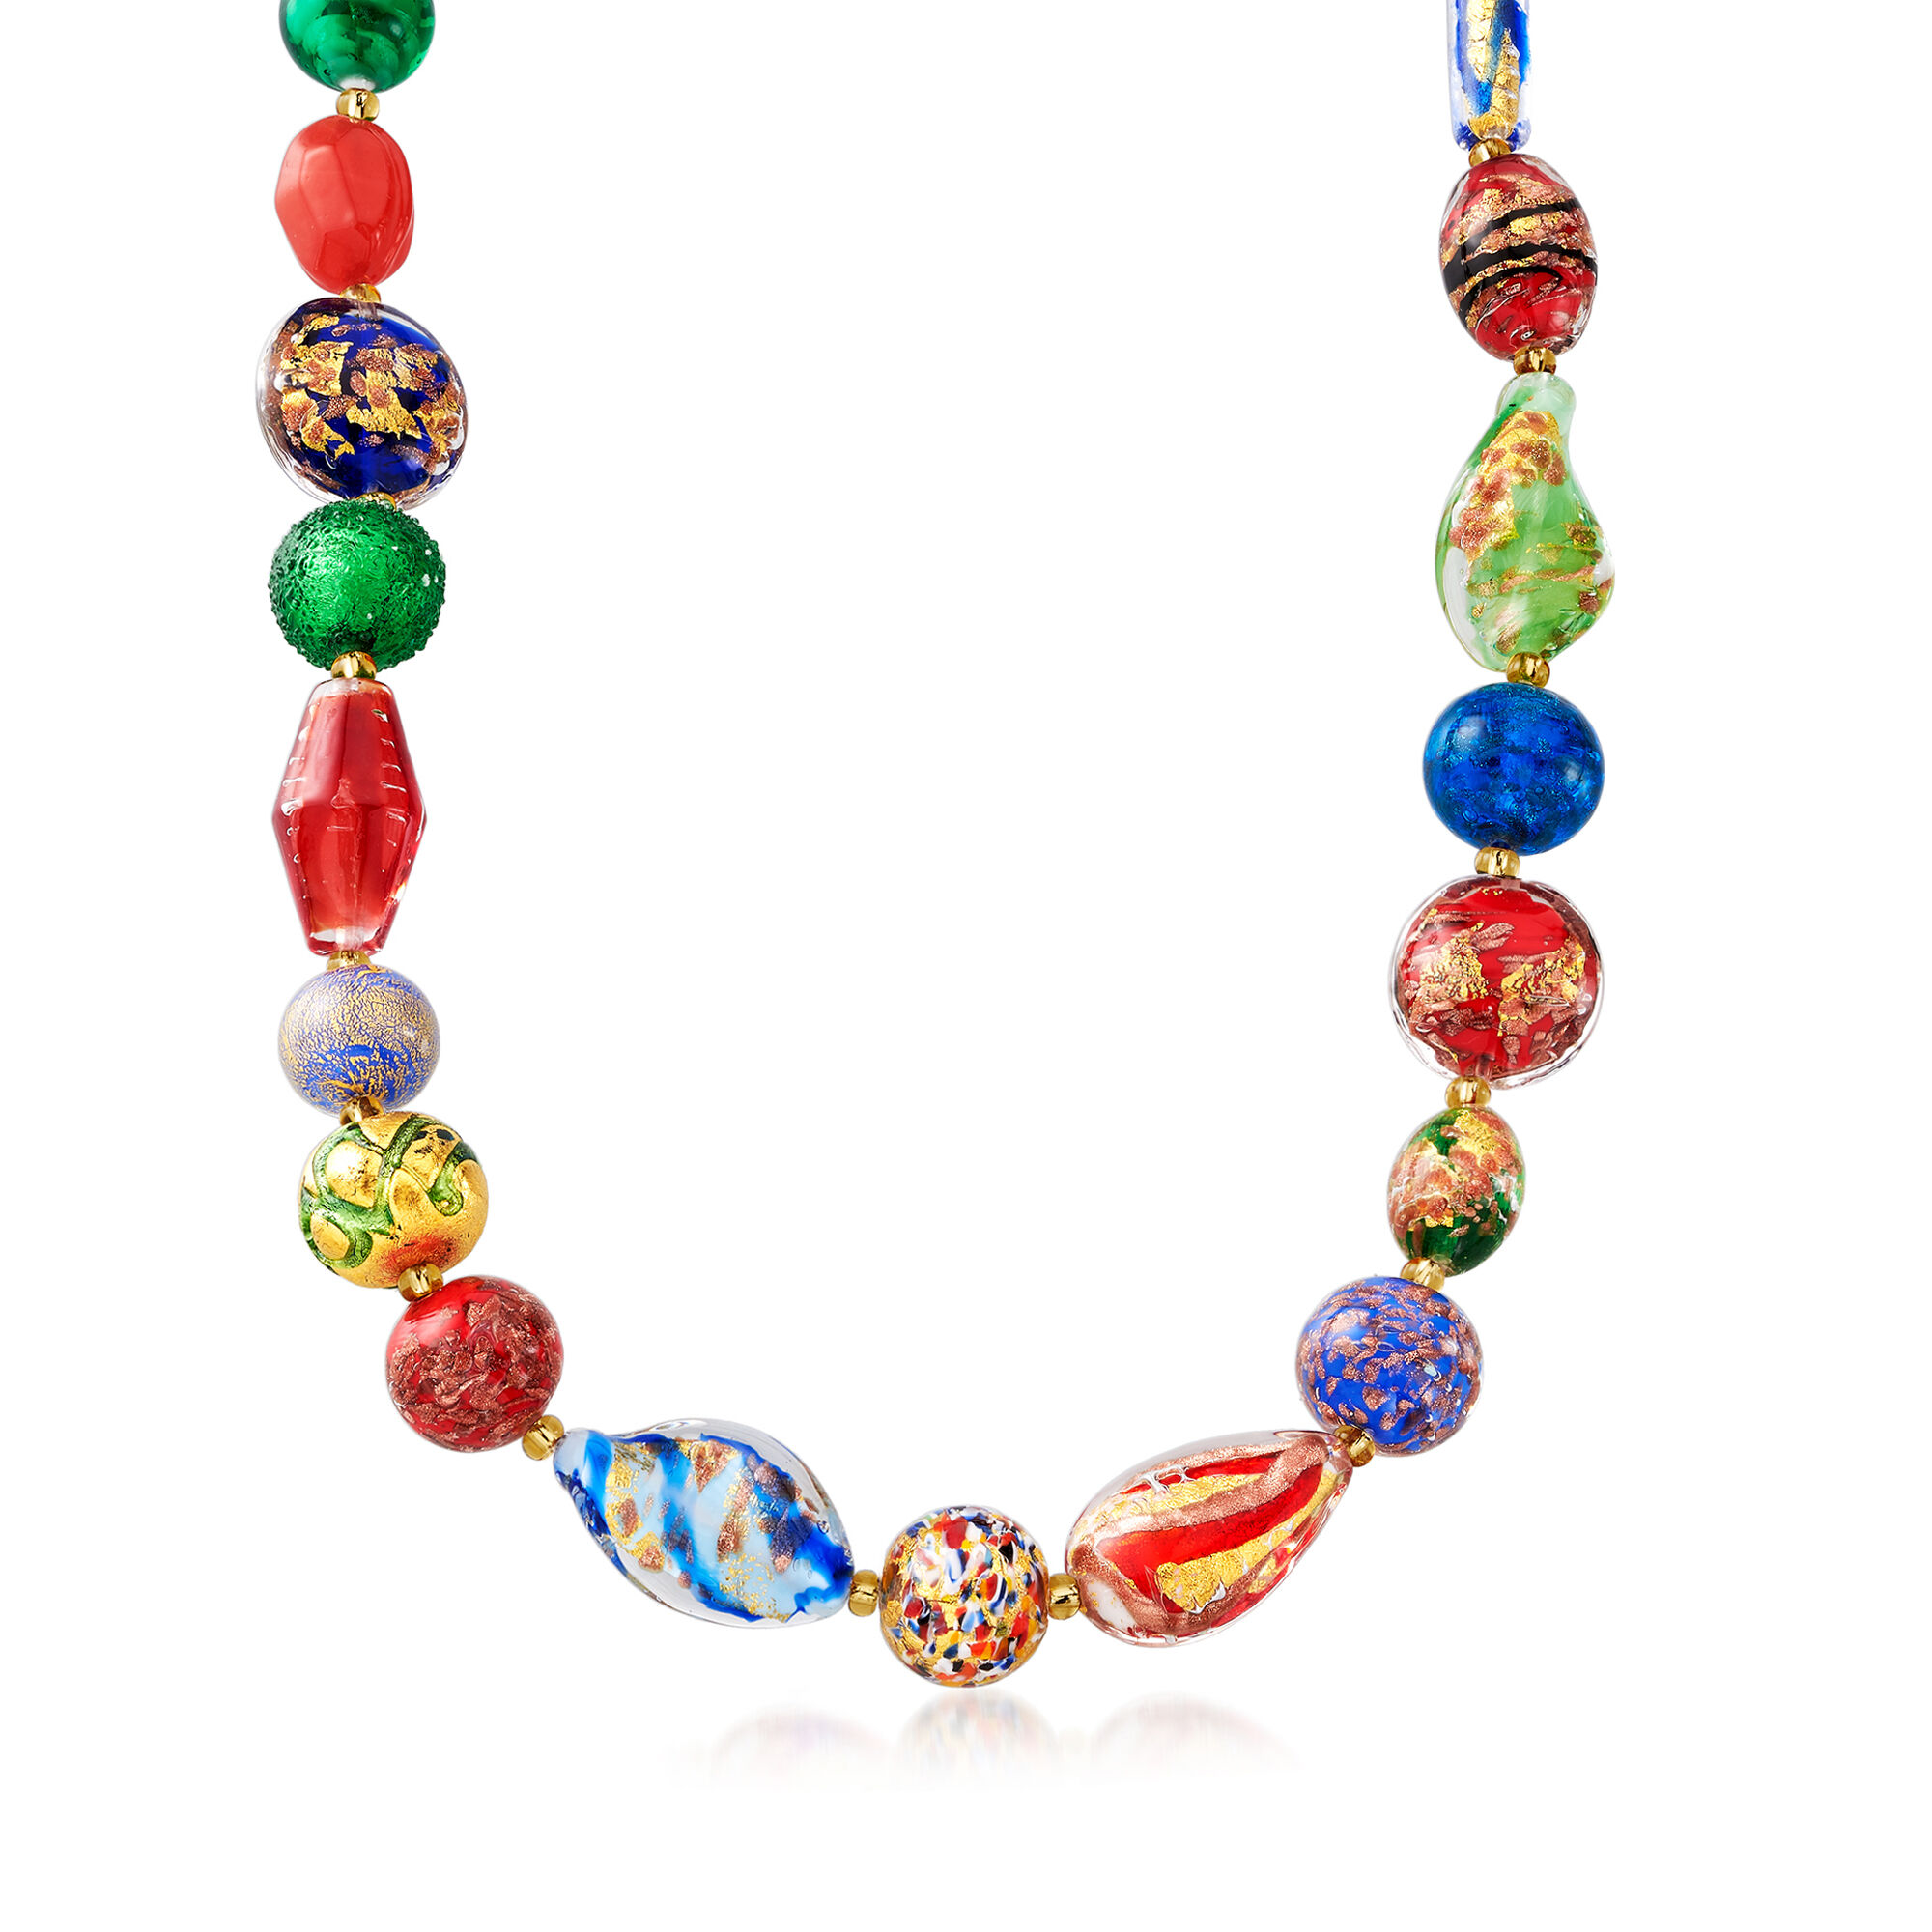 Italian 4-18mm Multicolored Murano Glass Bead Necklace with 18kt 